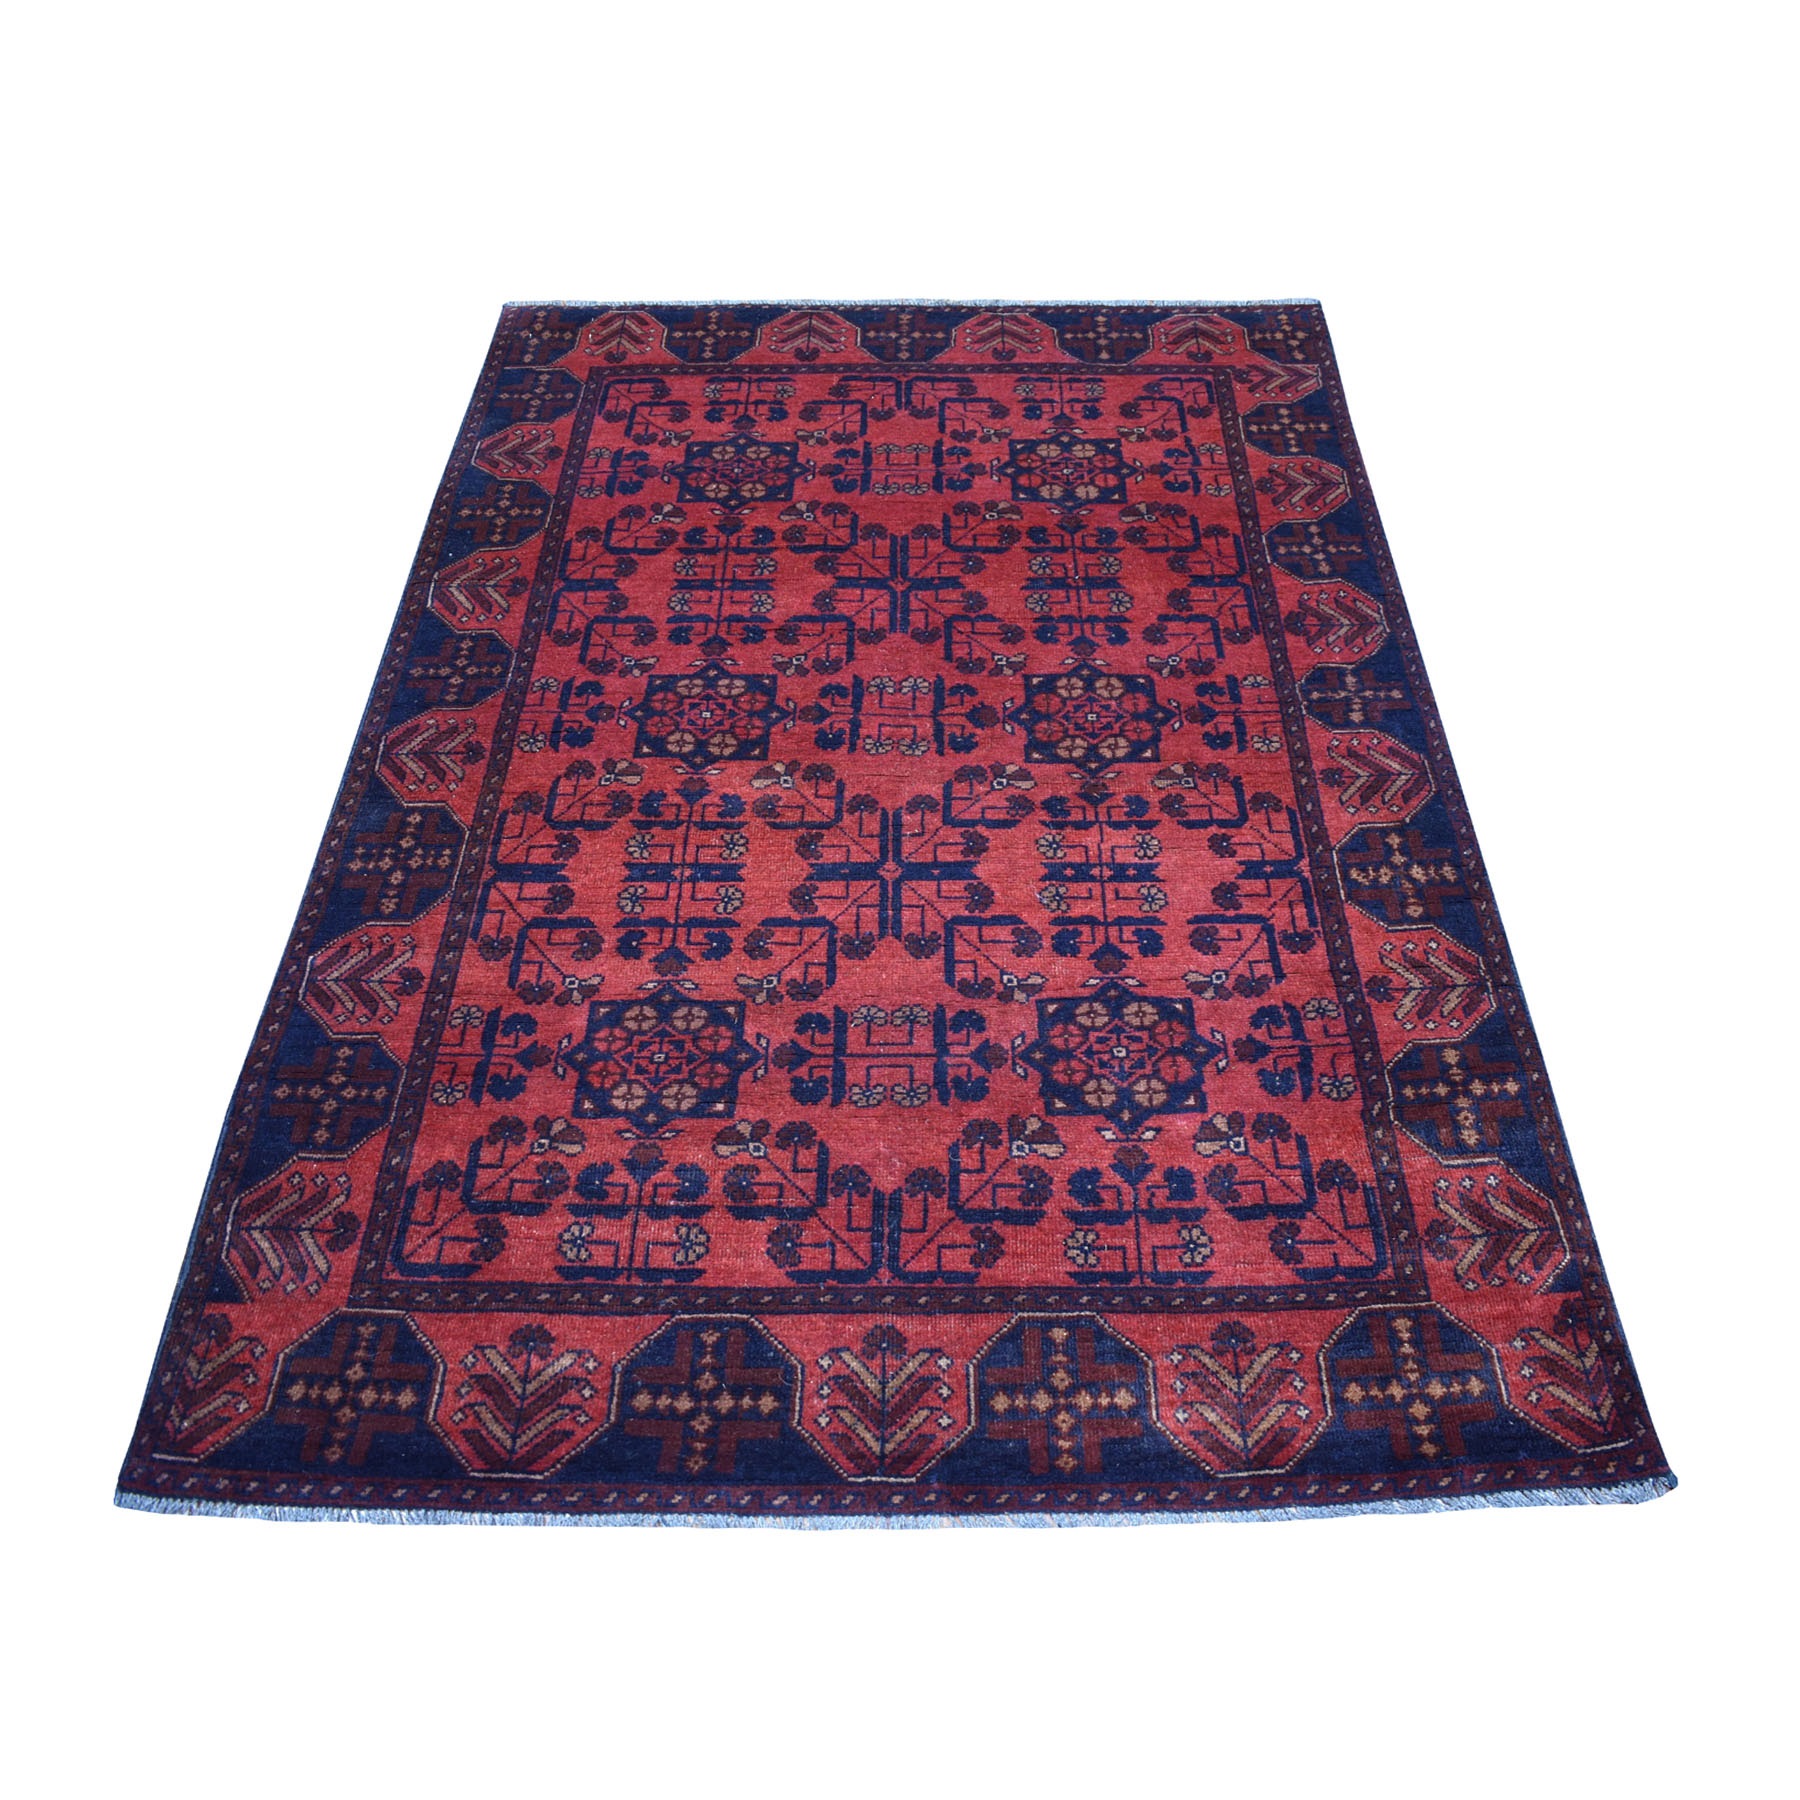 4'1"X6'3" Deep And Saturated Red Geometric Afghan Andkhoy Pure Wool Hand Knotted Oriental Rug moaec69e